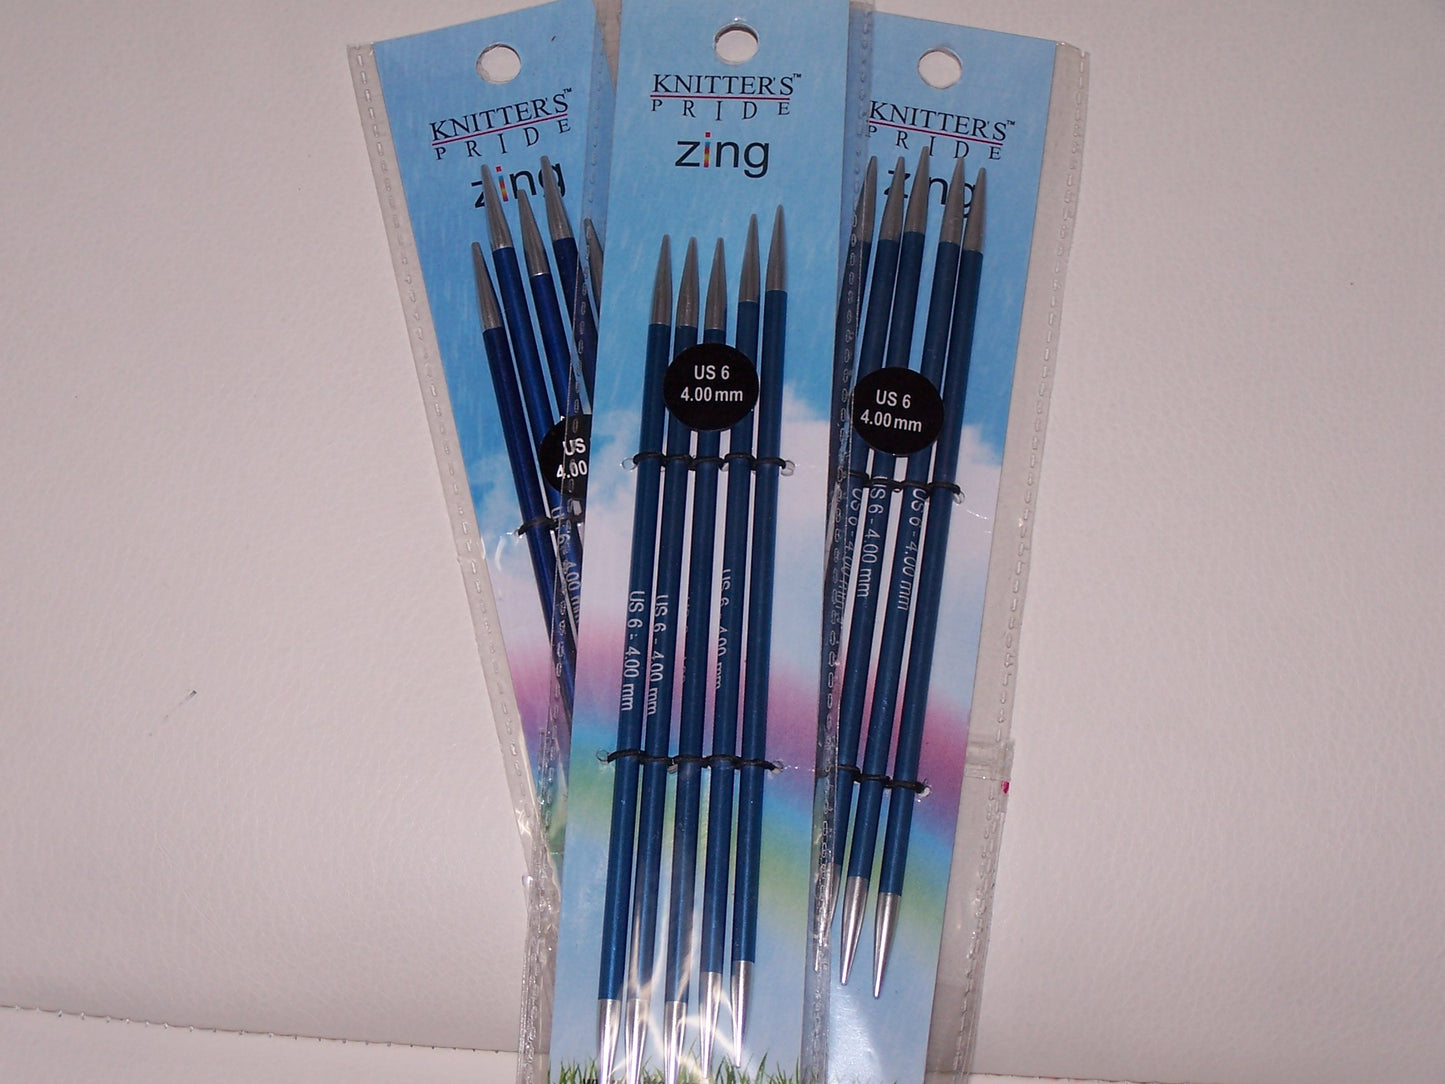 Knitters Pride Zing US 6 (4.00mm) size 6 inch DPN's